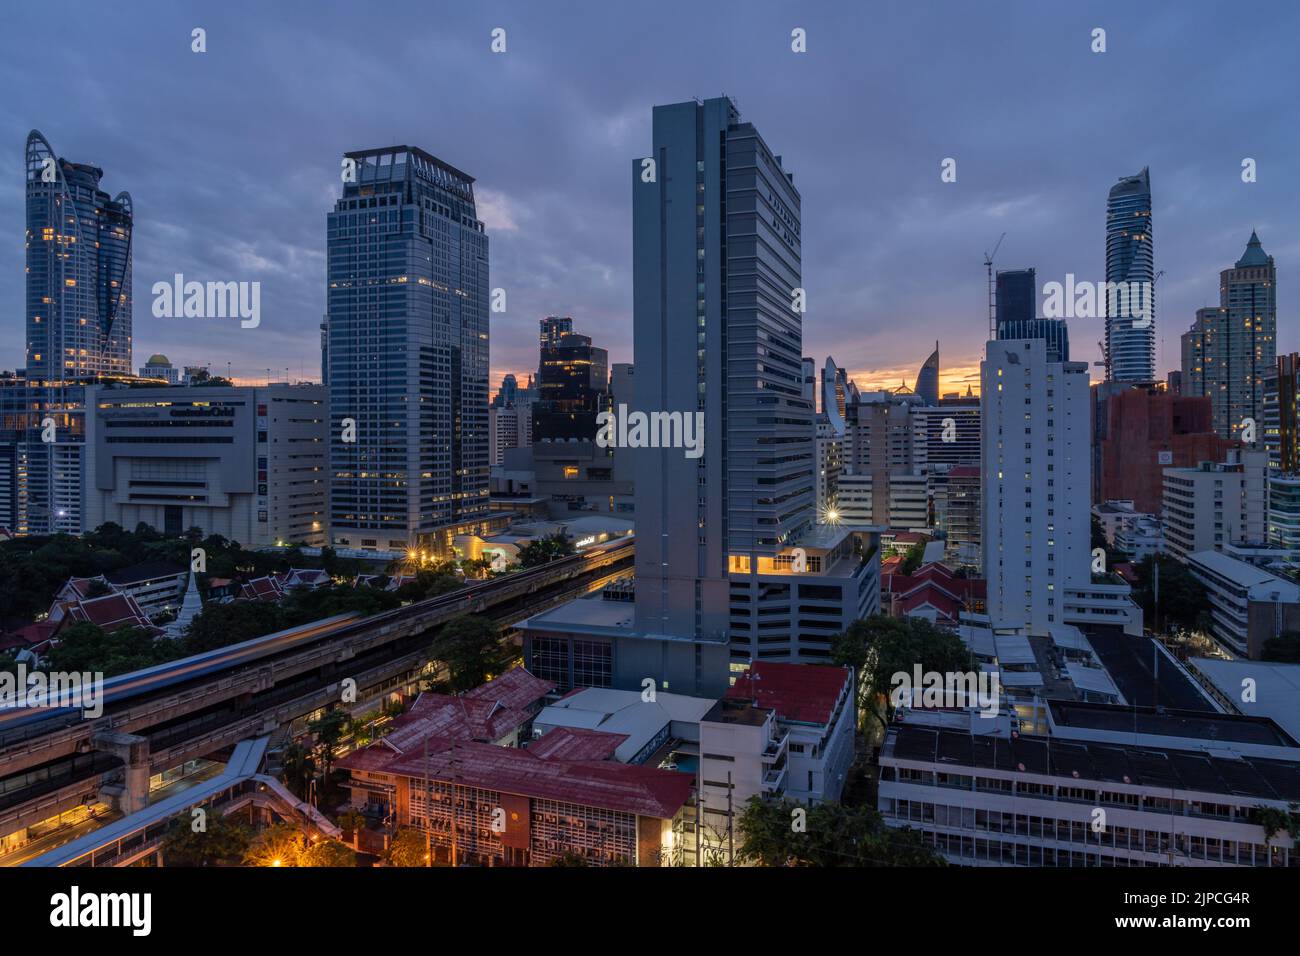 Bangkok, Thailand - 12 August 2022 - Aerial view of Bangkok cityscape in the morning before sunrise showing high-rises and running BTS skytrains and c Stock Photo